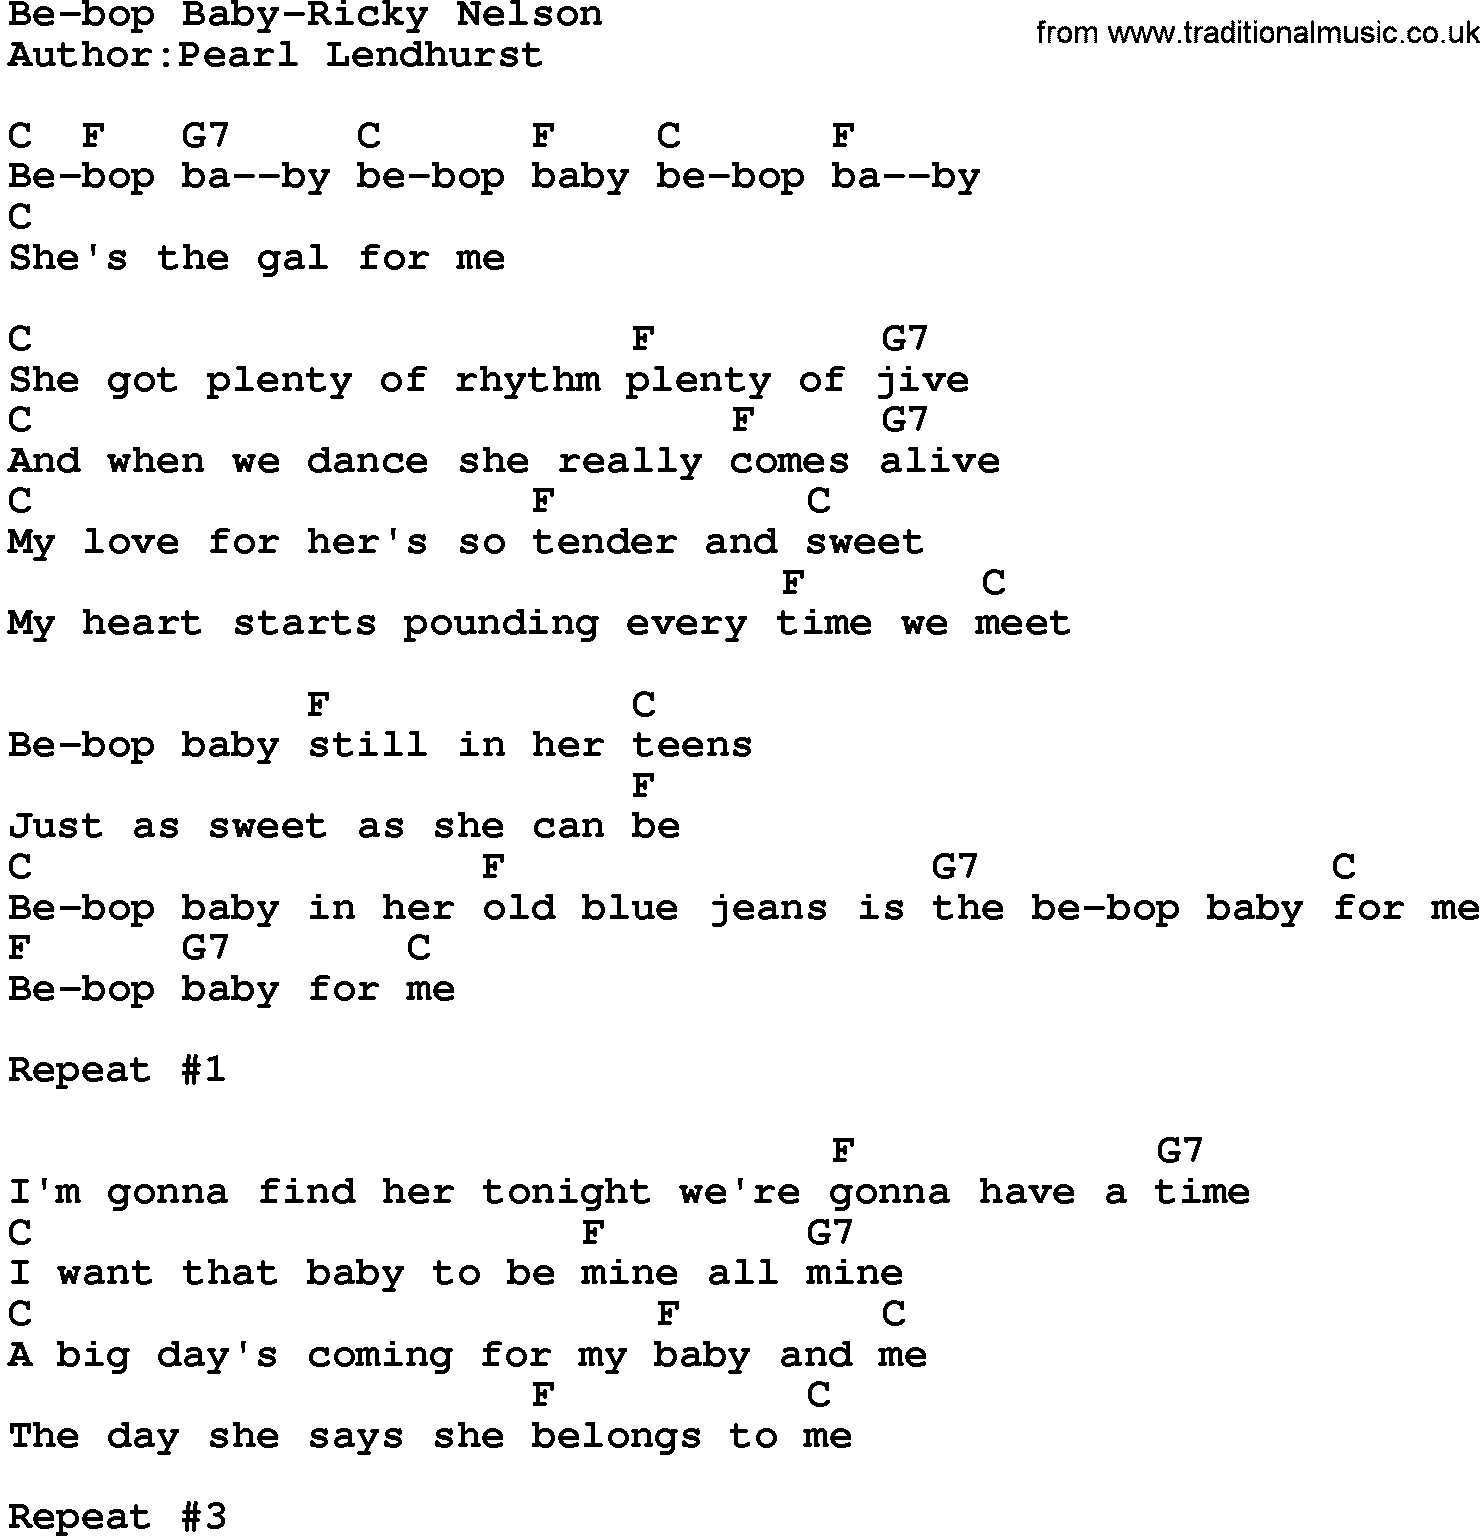 Country music song: Be-Bop Baby-Ricky Nelson lyrics and chords